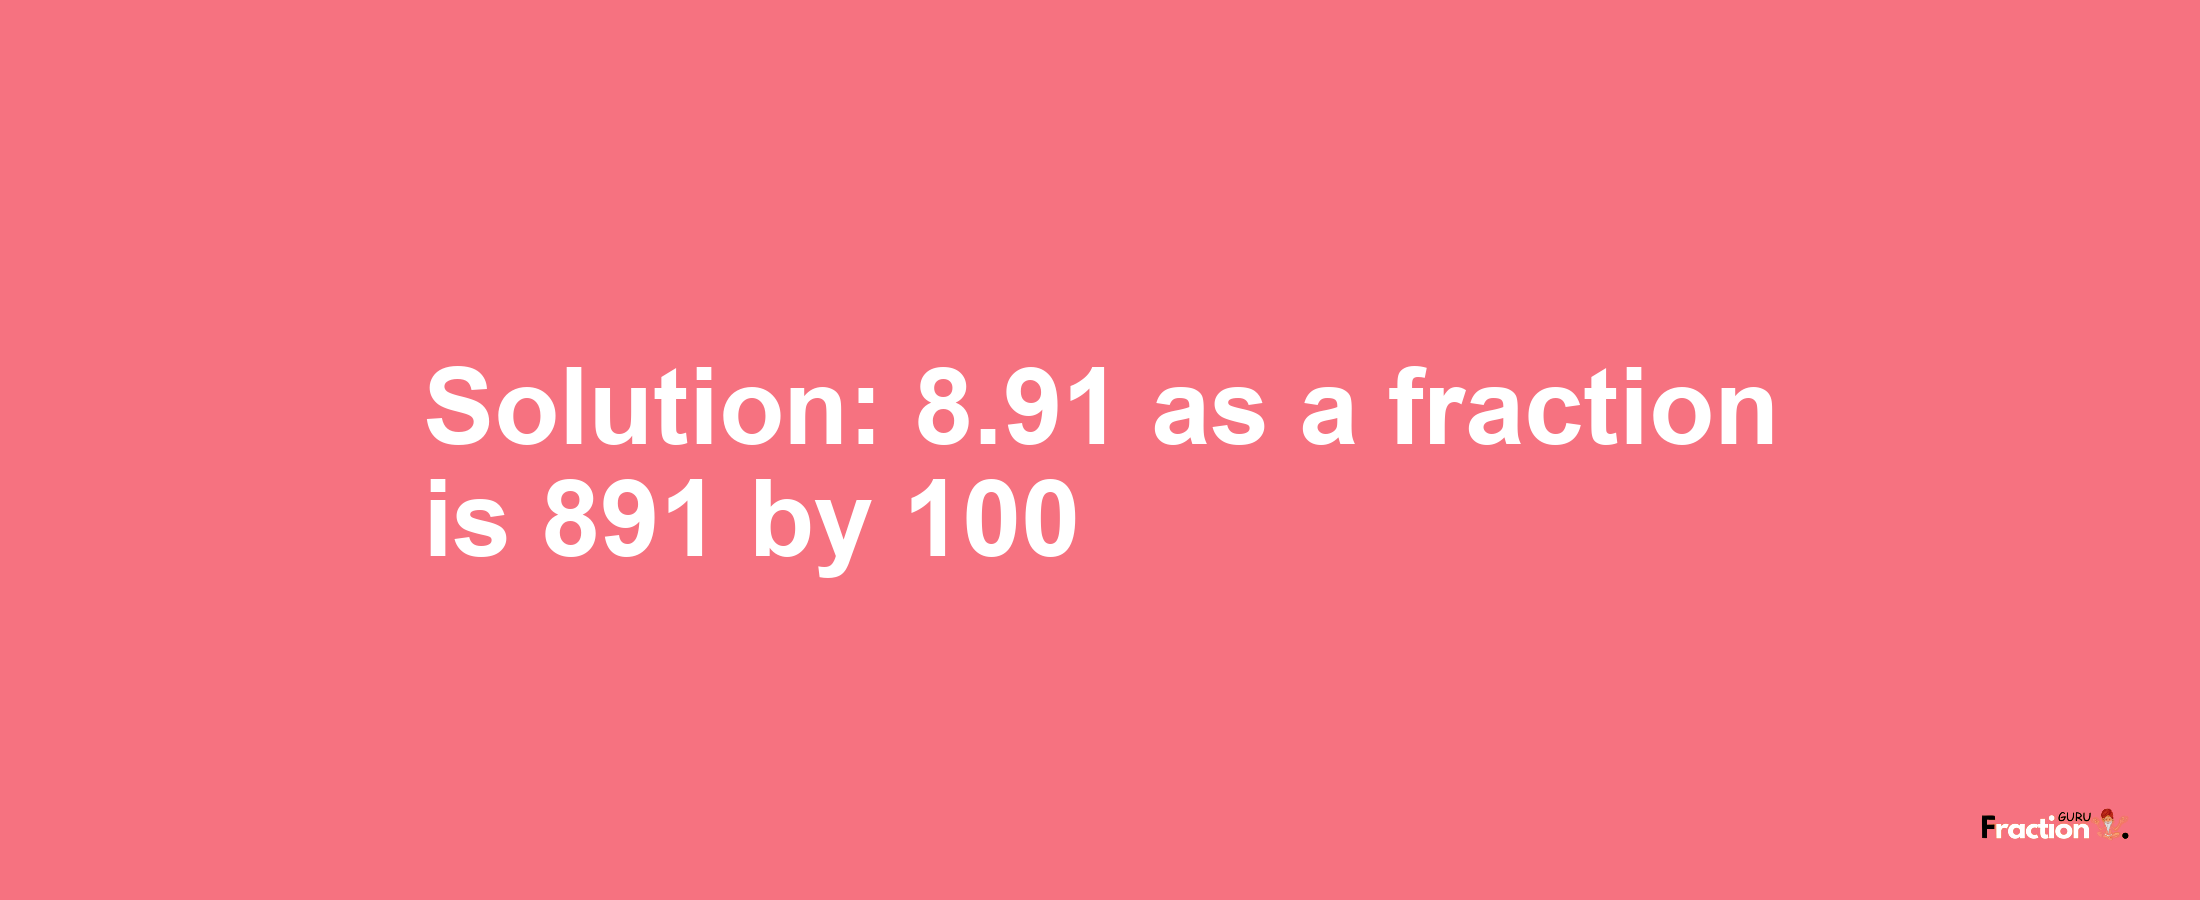 Solution:8.91 as a fraction is 891/100